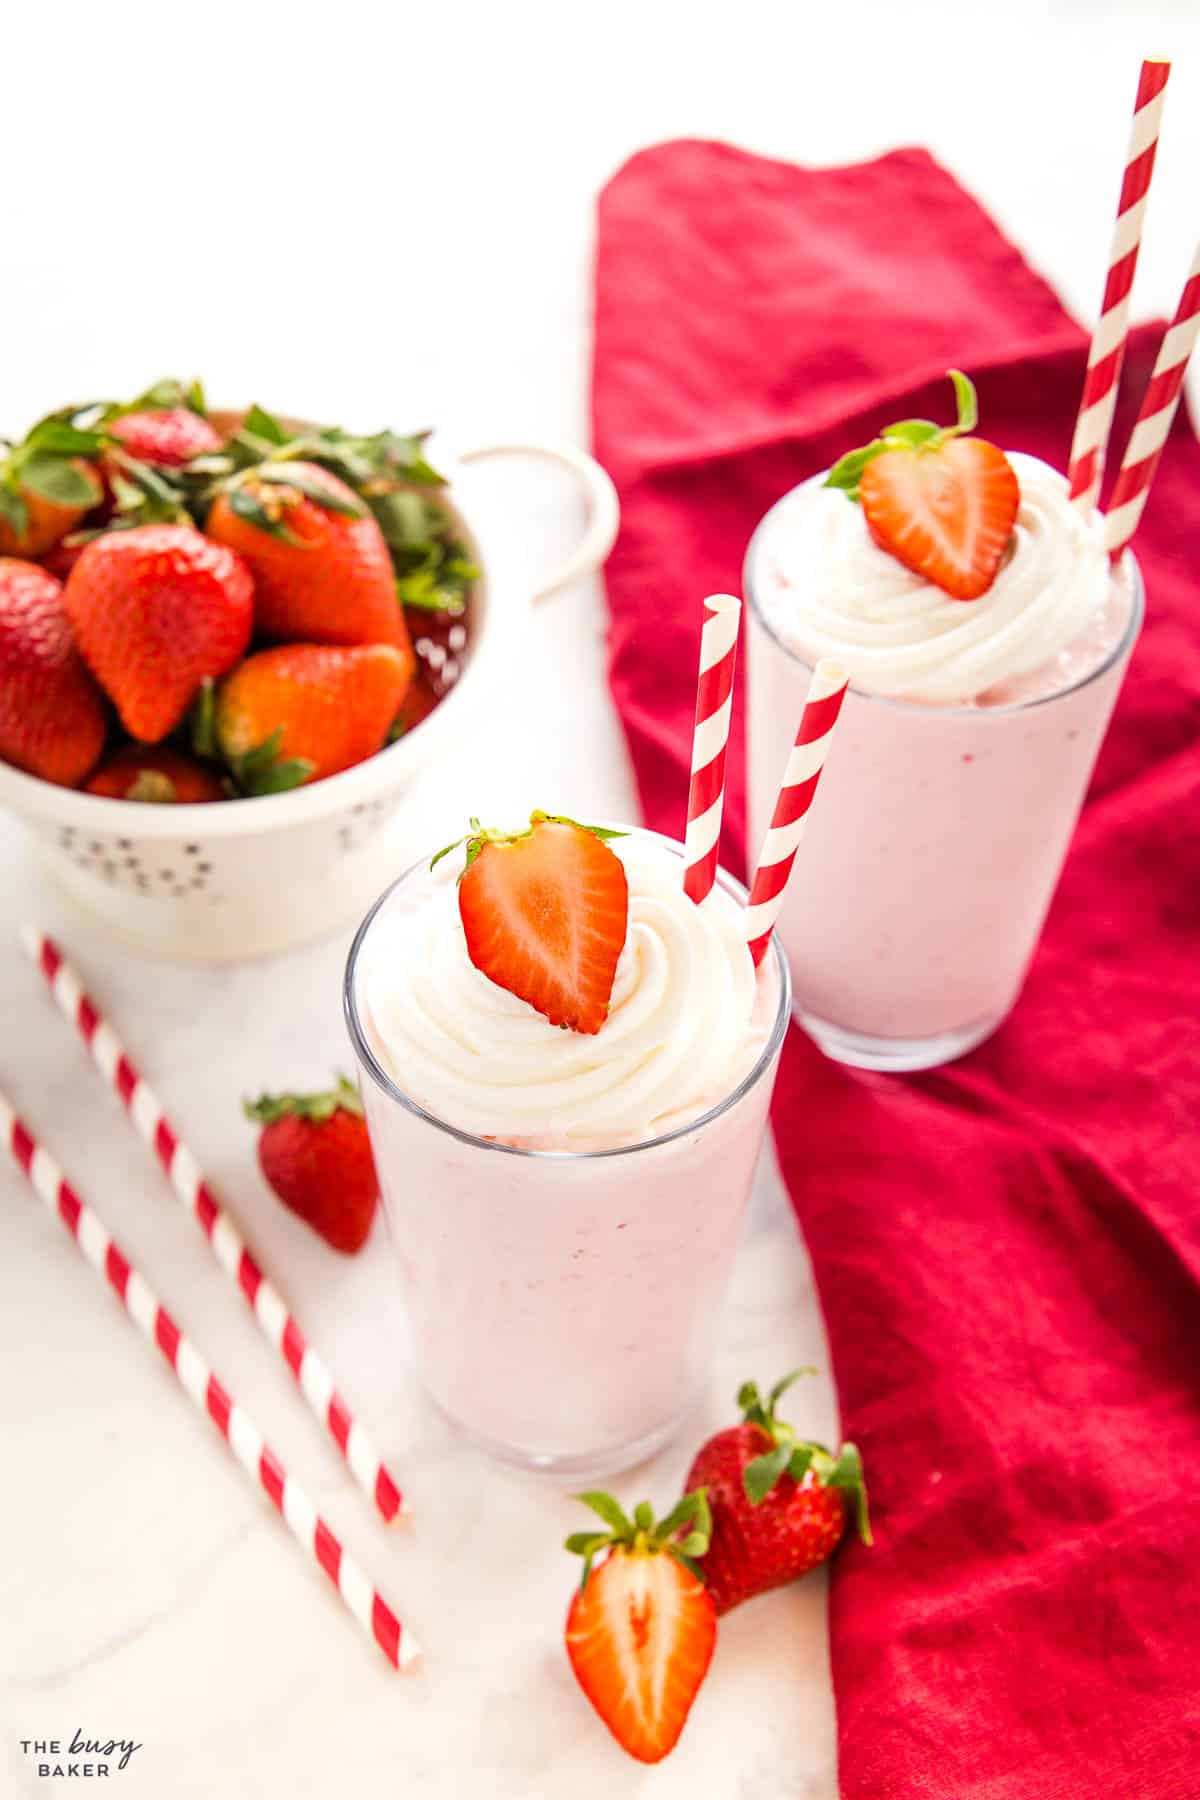 berry ice cream drink with fresh berries and whipped cream